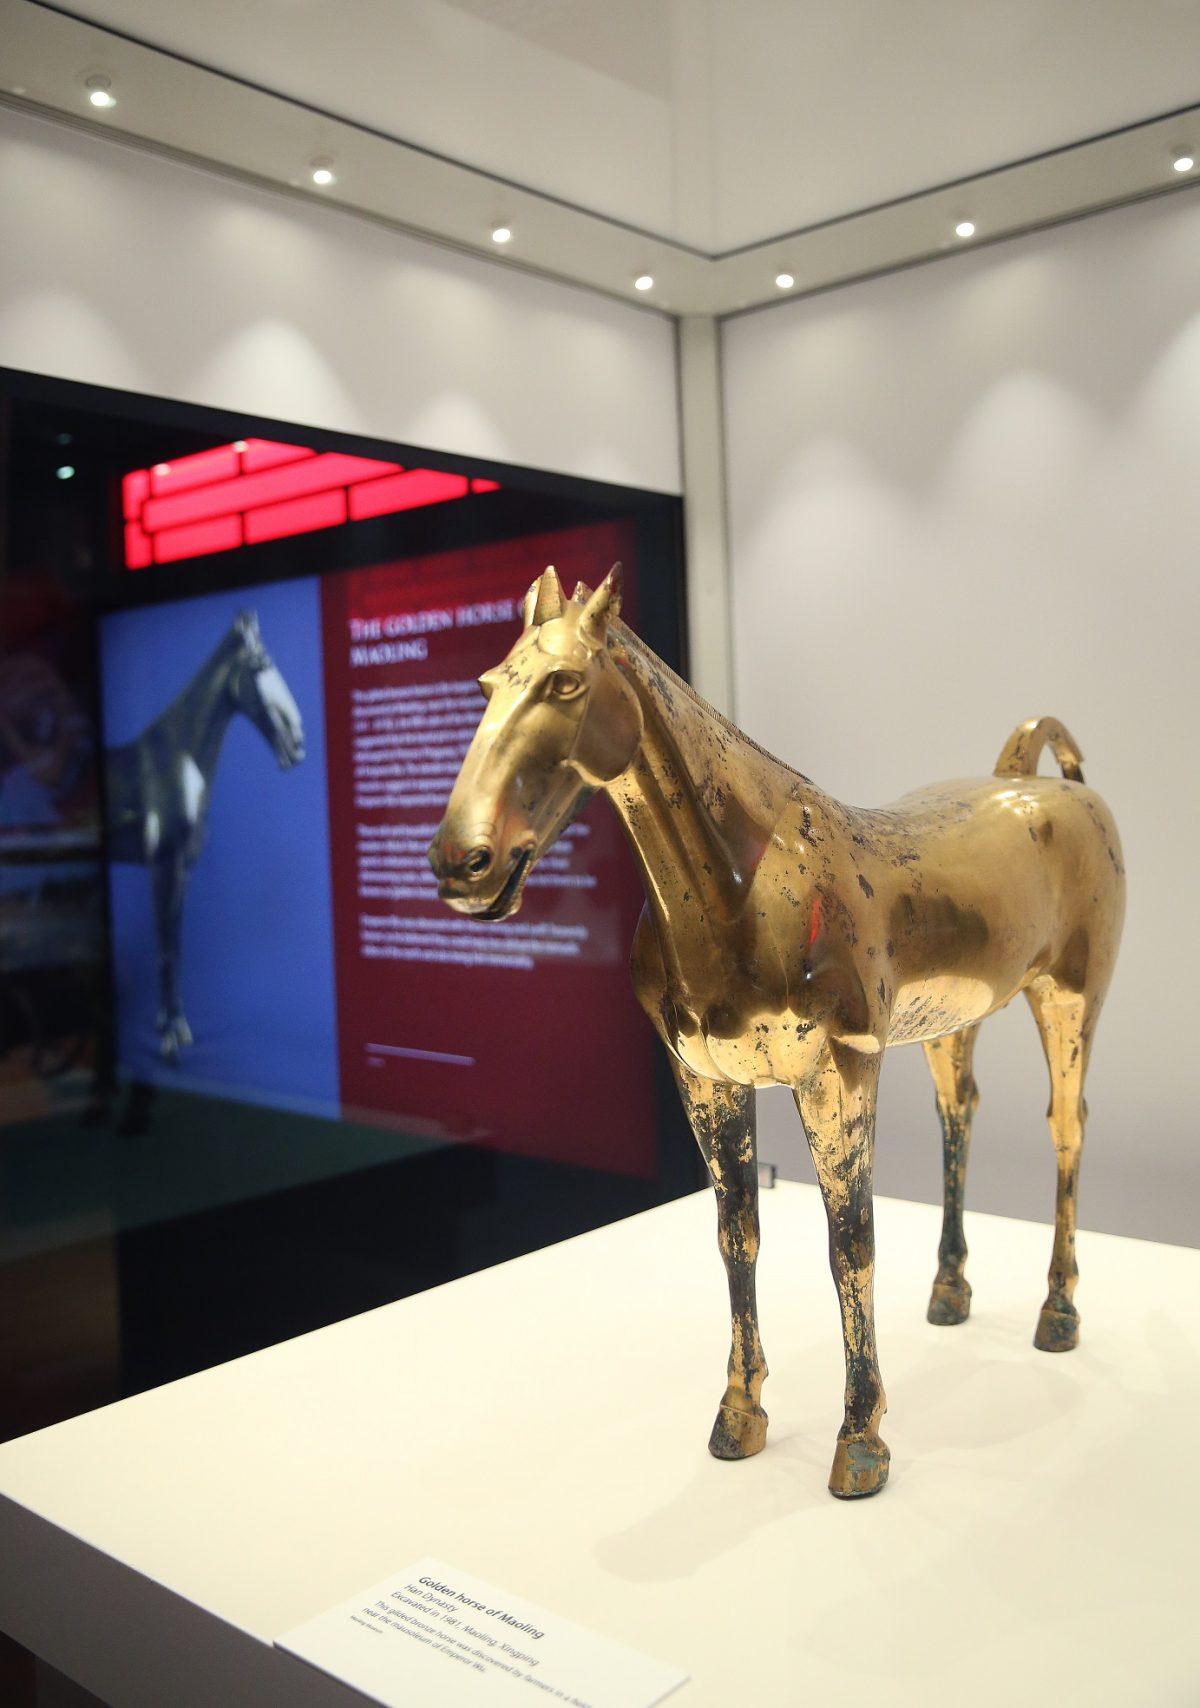 The famous “Golden Horse of Maoling” stands 2 feet tall, the largest gilded horse found in China to date, at the World Museum in Liverpool, England. (Gareth Jones)